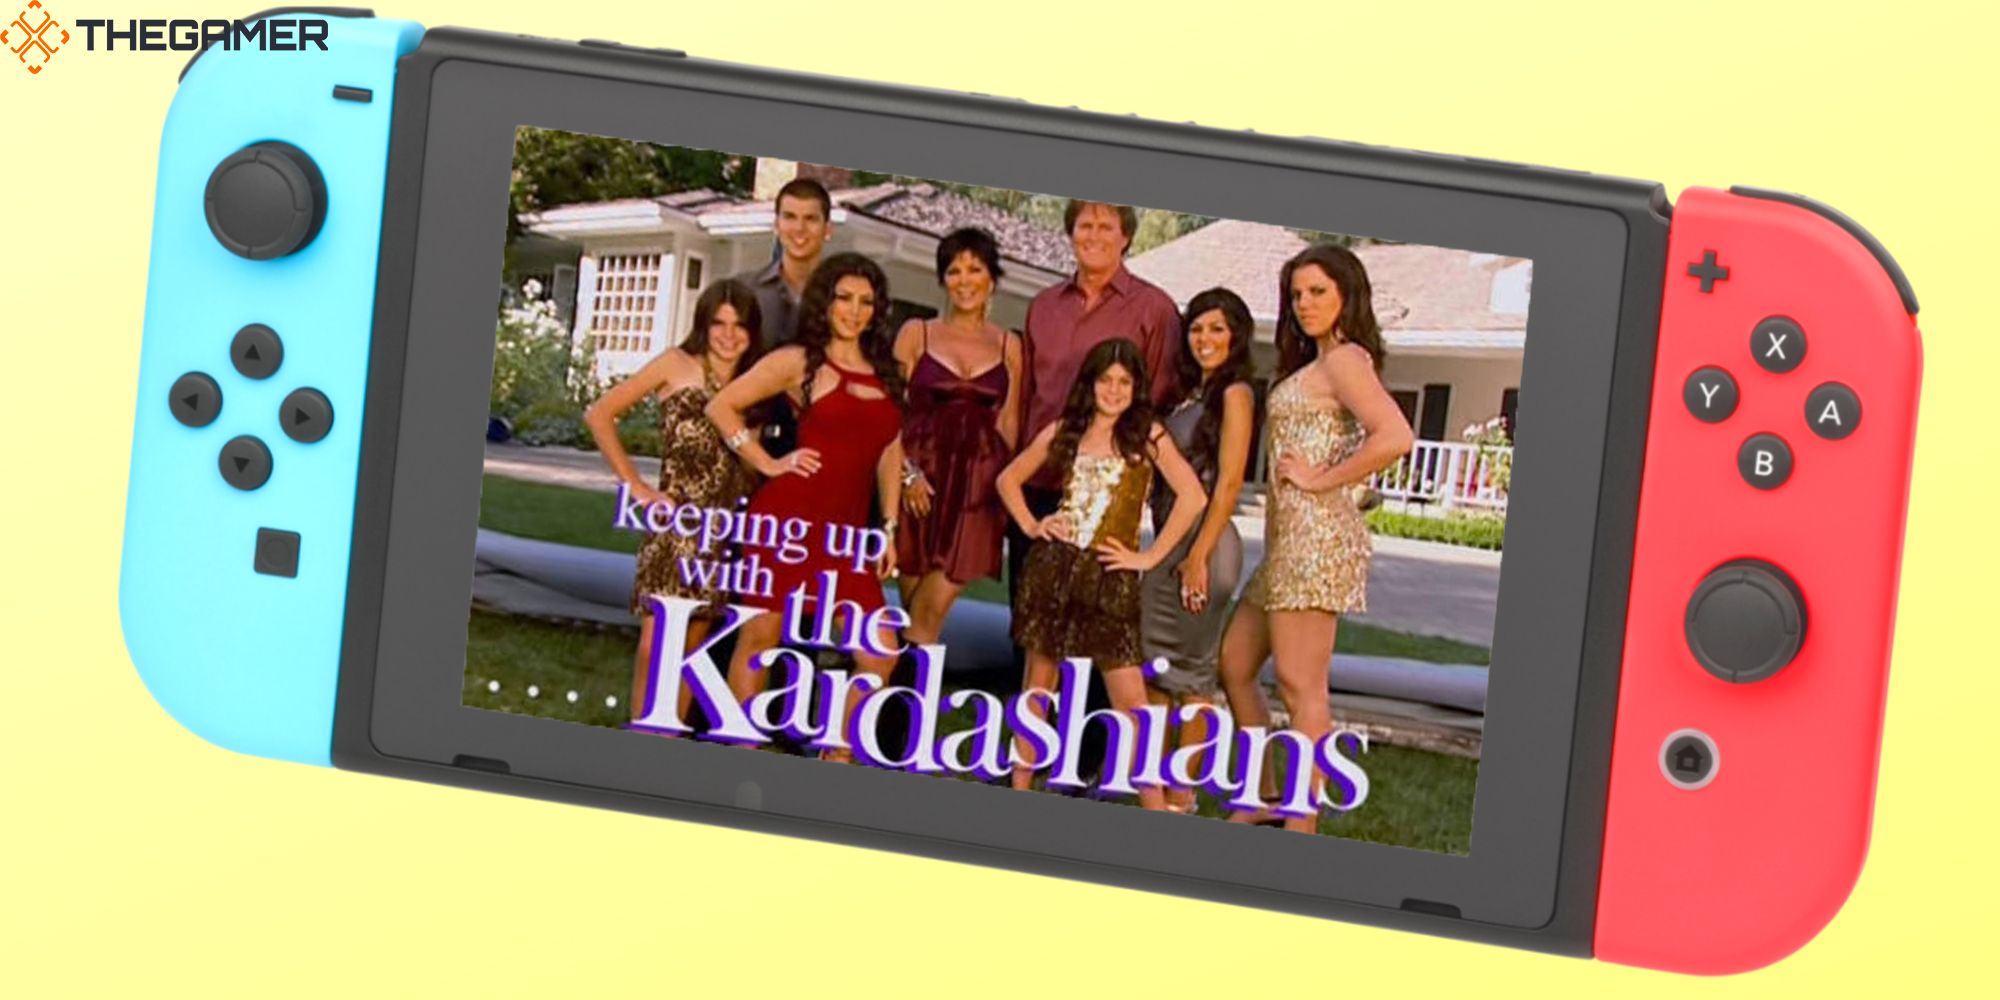 Keeping Up With The Kardashians plays on an Nintendo Switch screen.